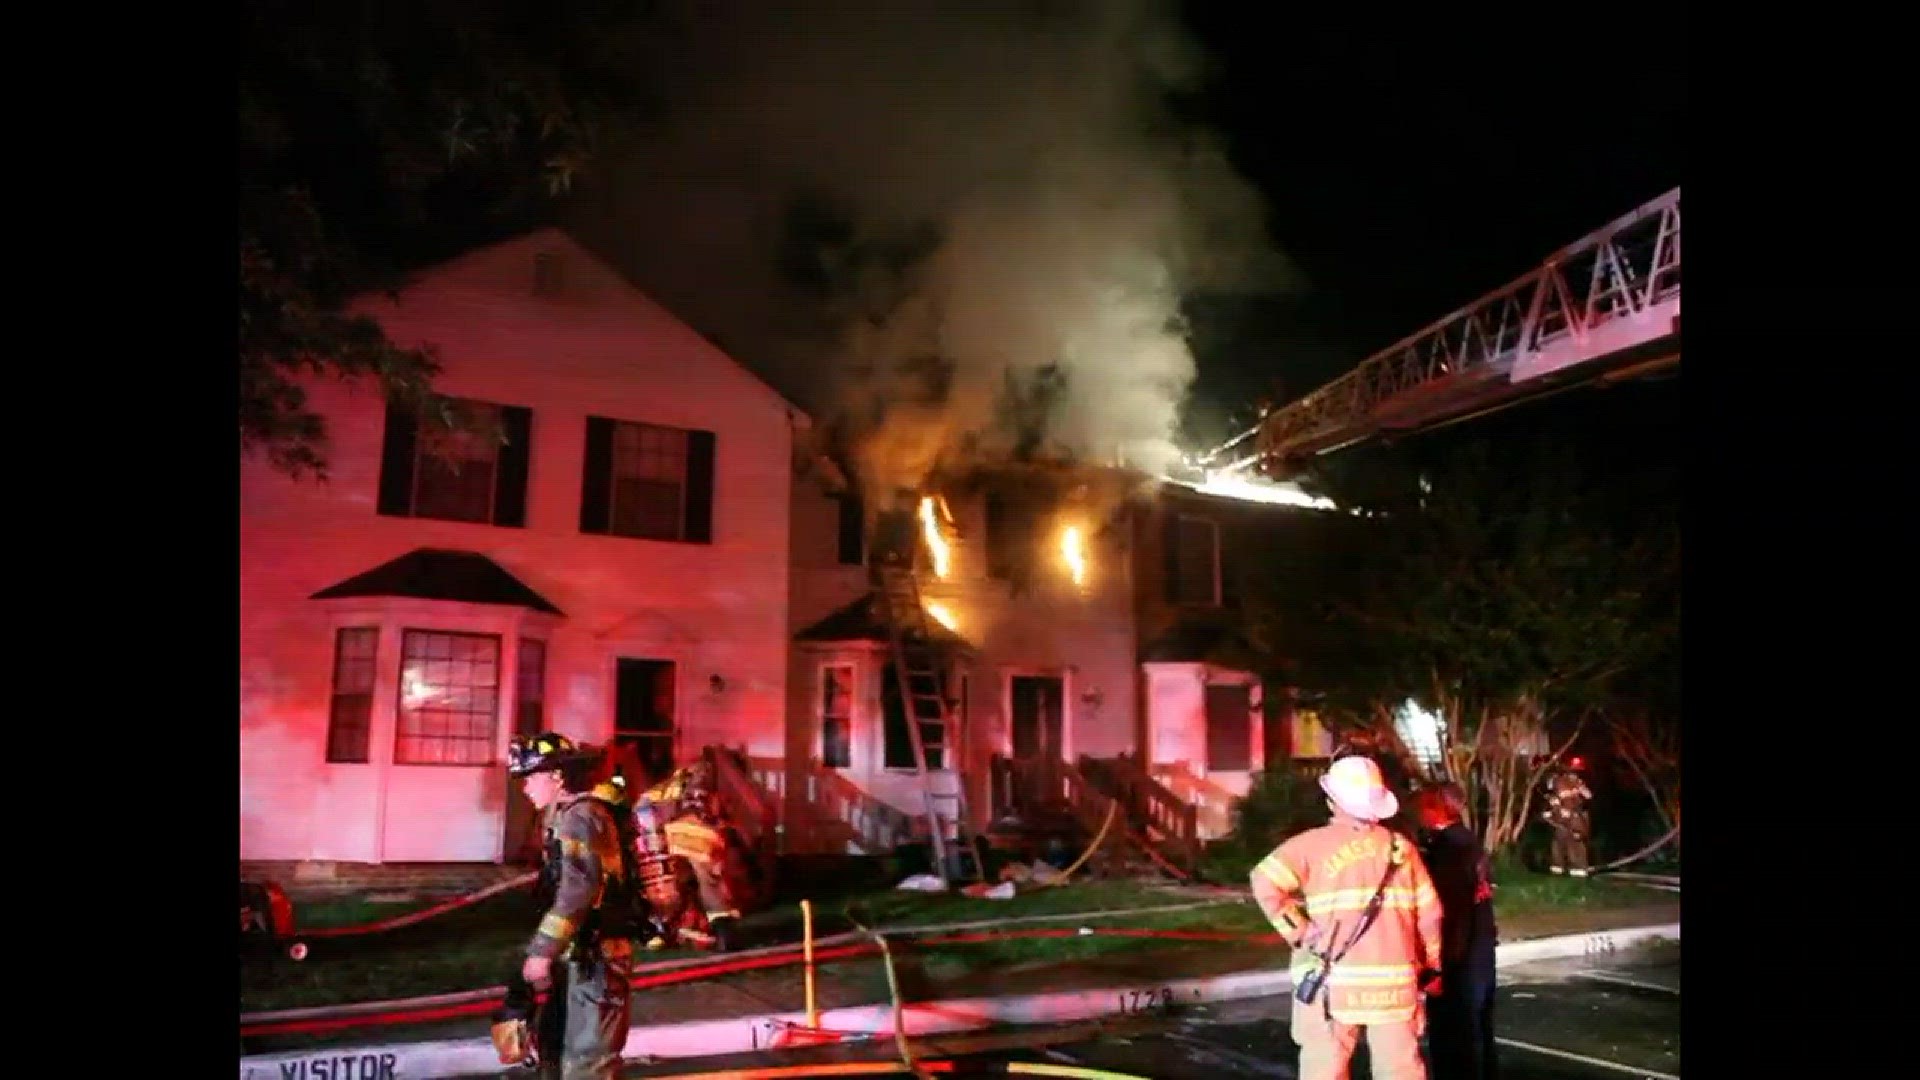 A townhouse fire in Williamsburg displaces 10 people. Video courtesy Alton Catlett, James City Count FD